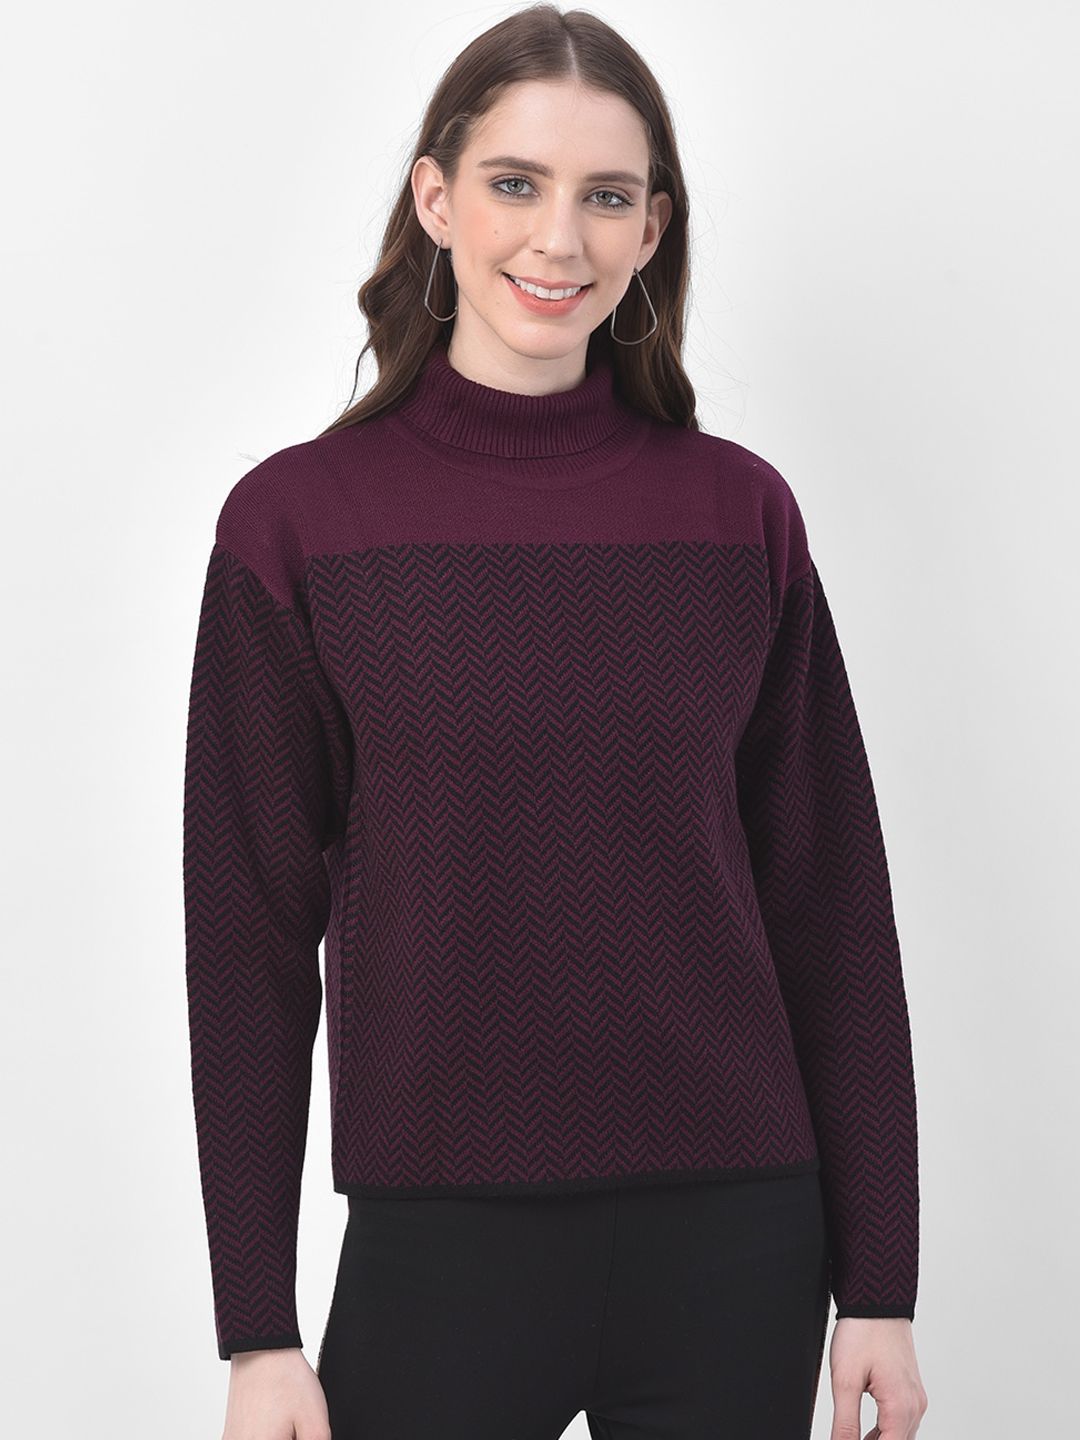 Latin Quarters Women Burgundy & Black Chevron Patterned Pullover Sweater Price in India